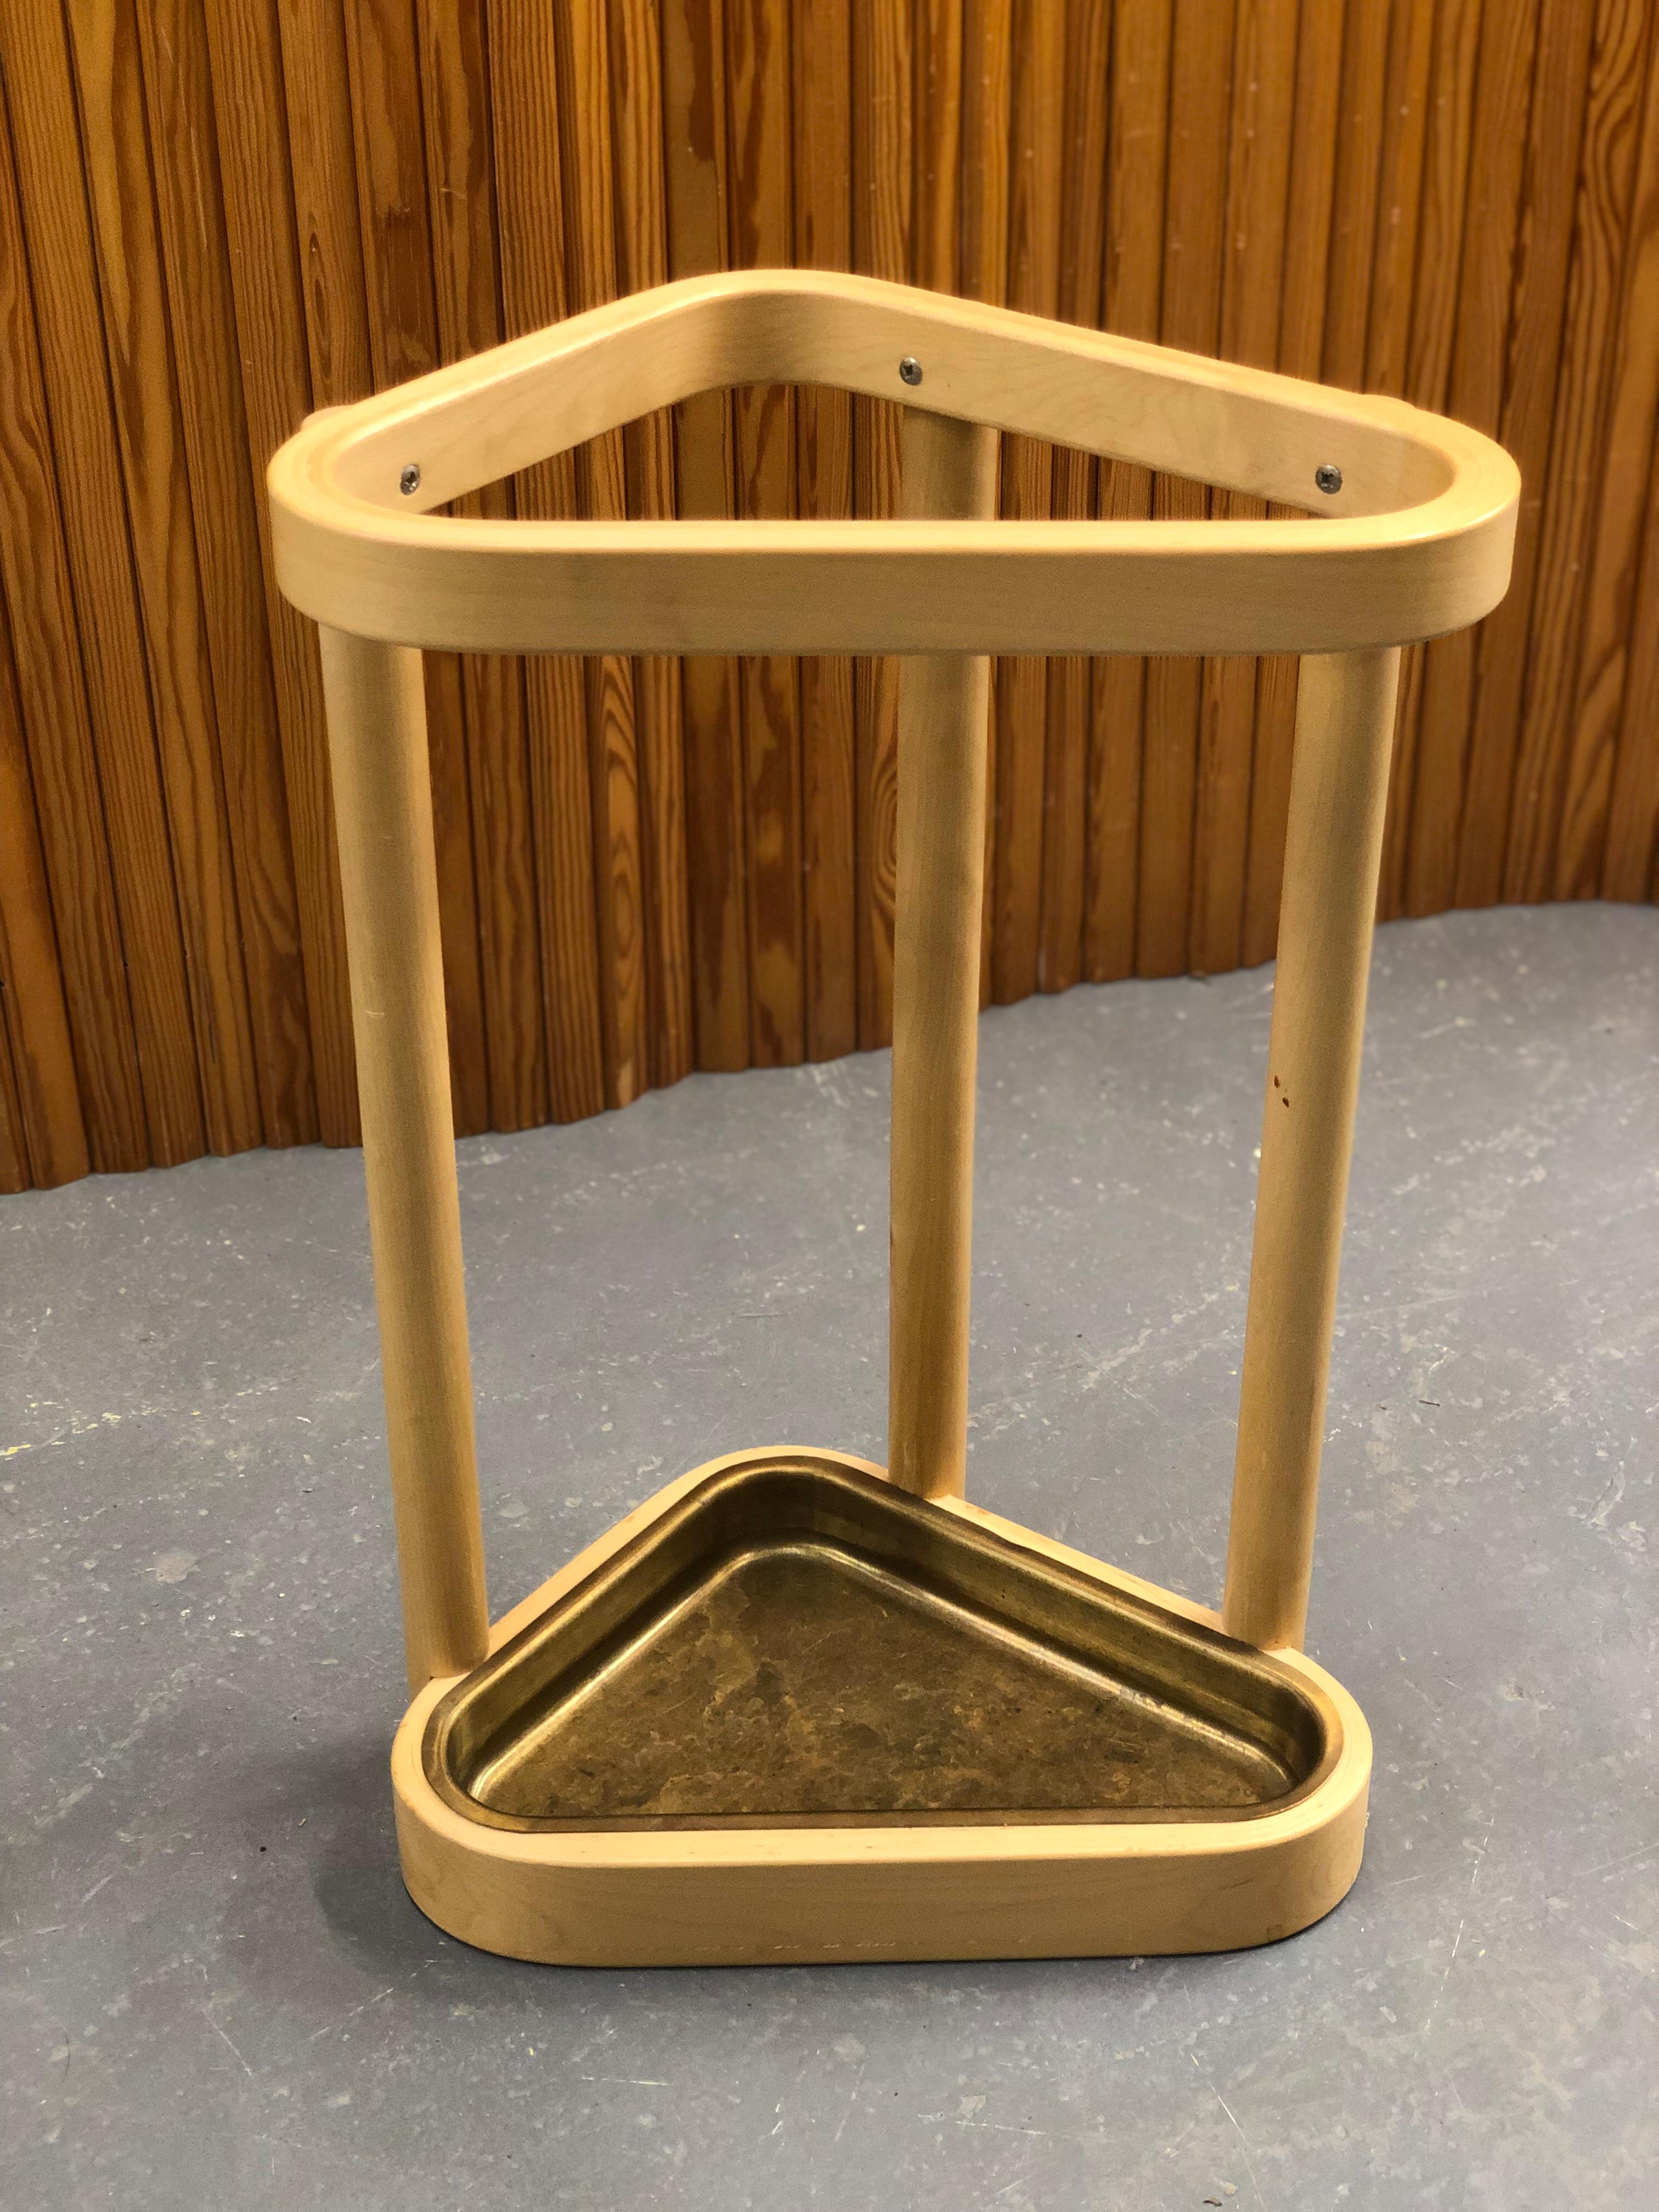 Umbrella stand designed by the one and only Alvar Aalto and manufactured in the late 70s by Artek. Alvar Aalto was known for being the driving force in Scandinavian modern design, which takes a minimalistic and functional approach as seen from this